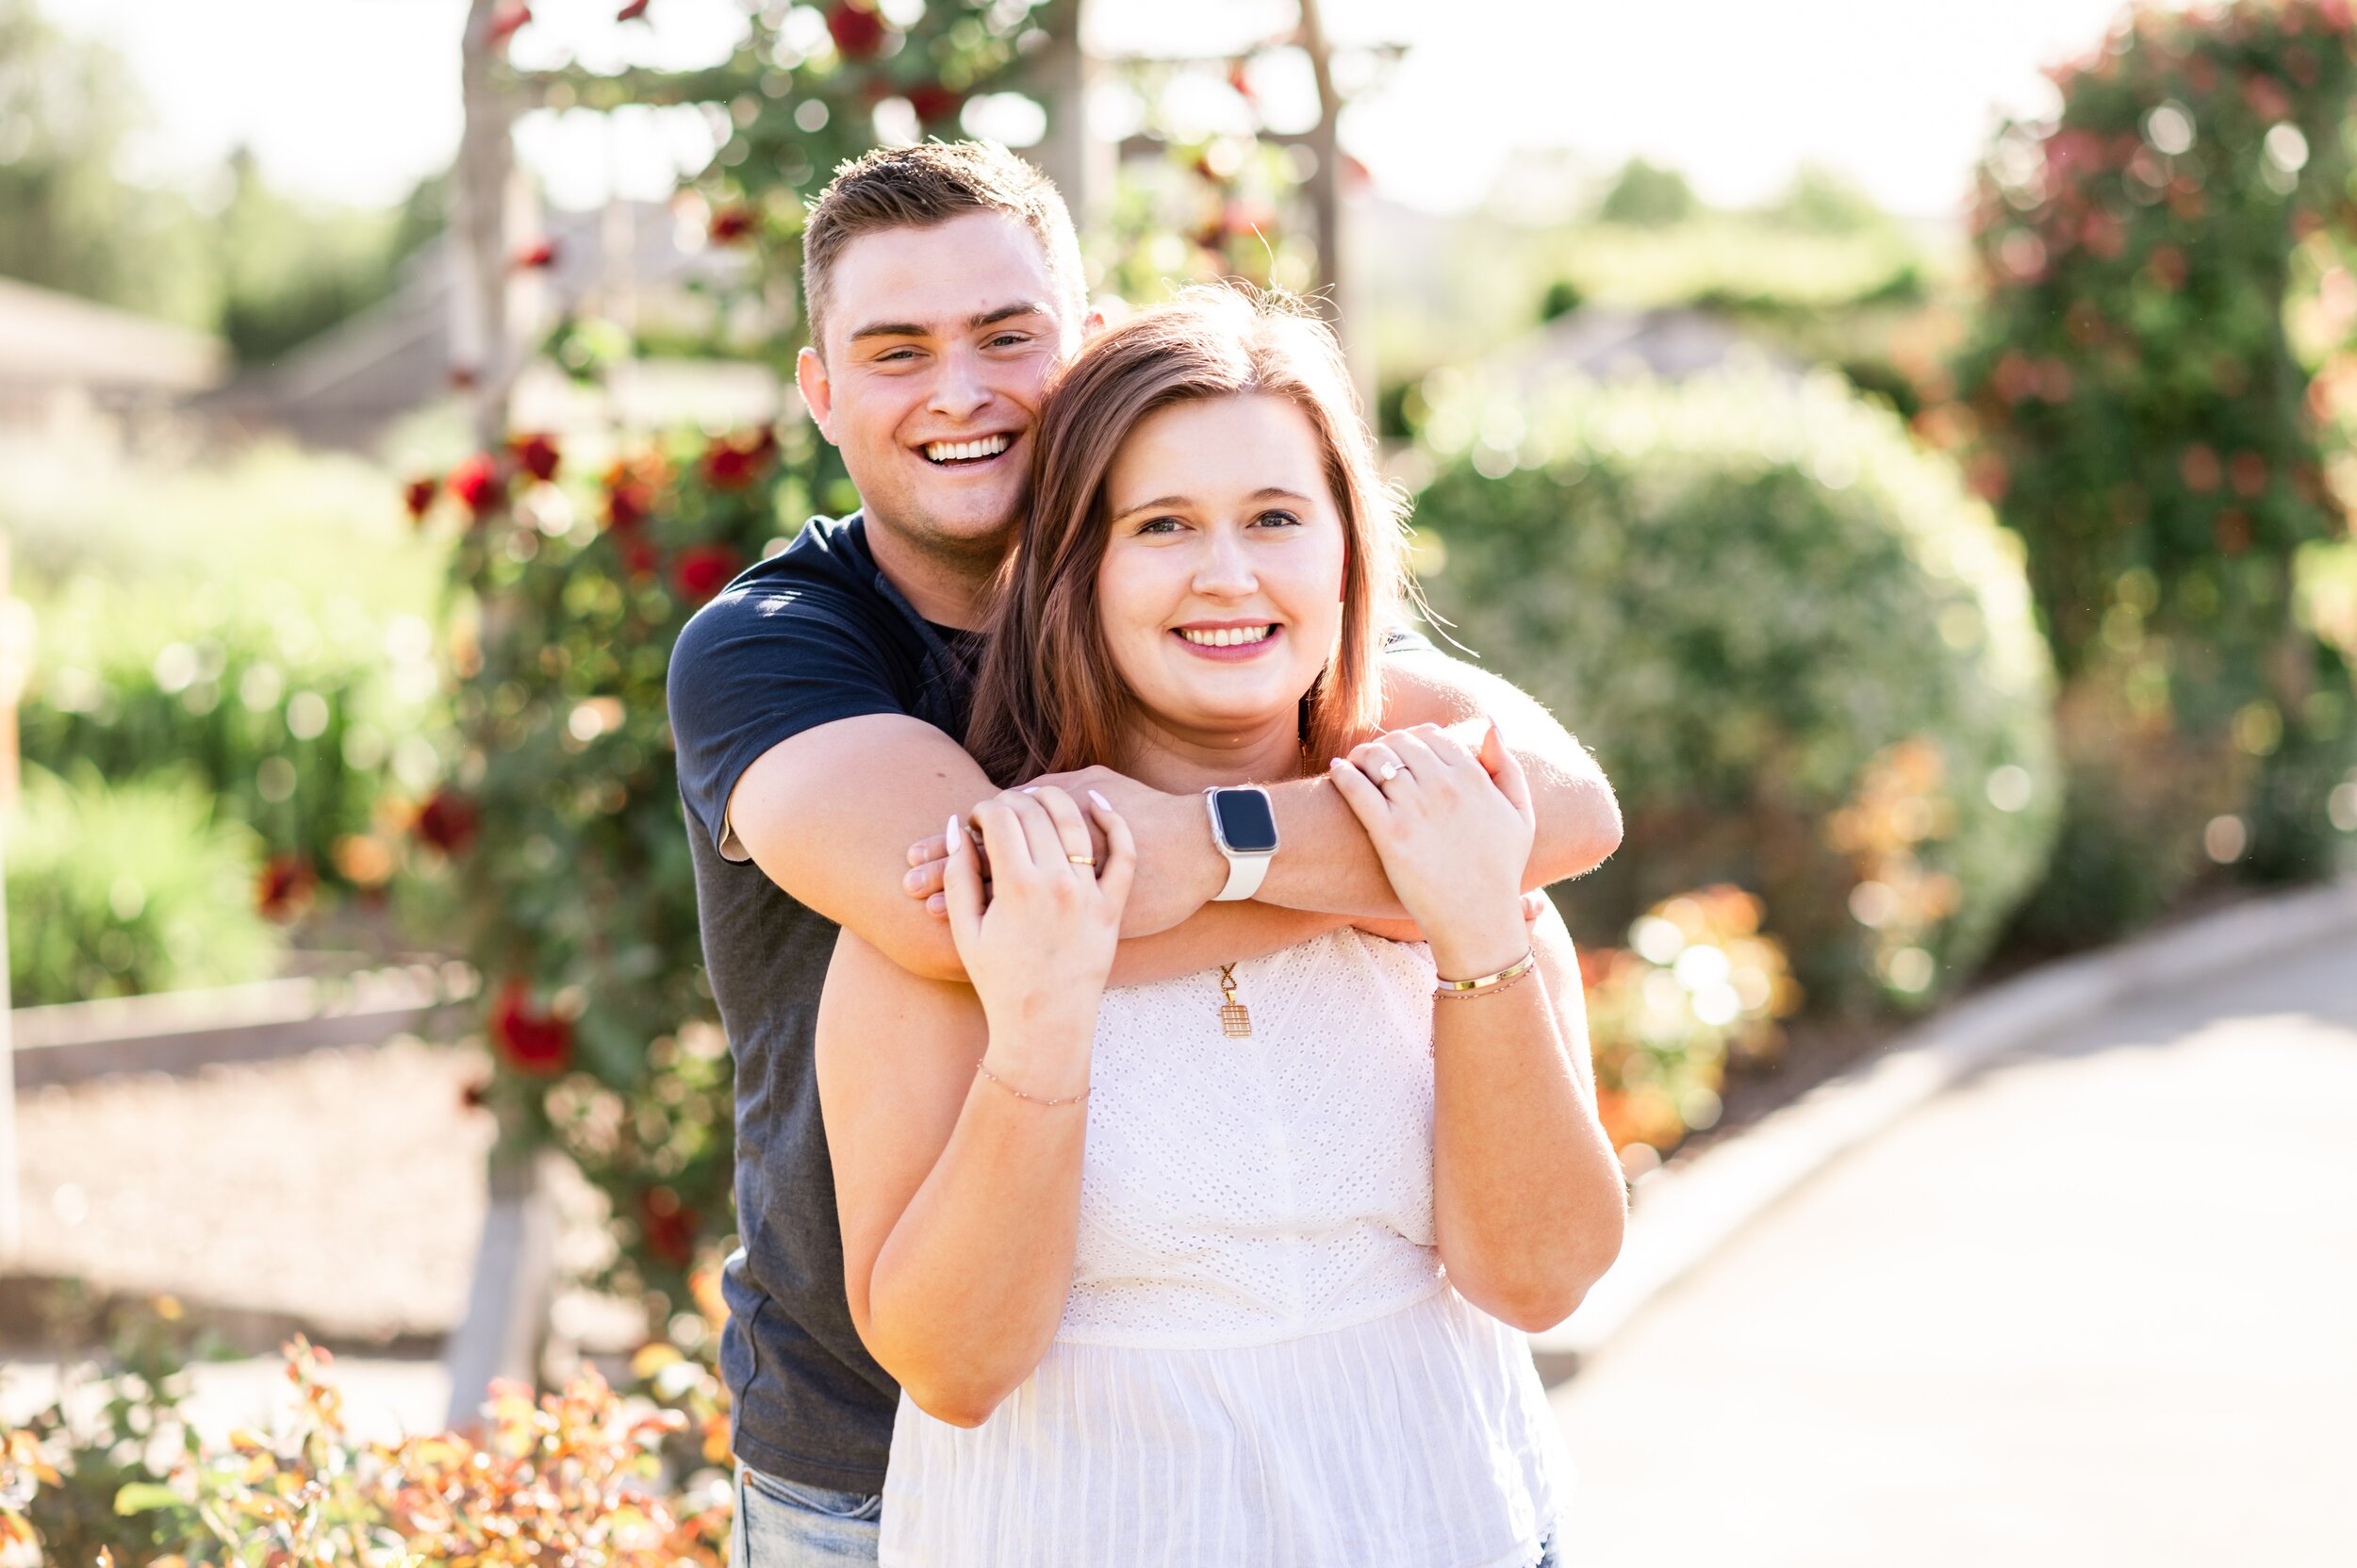 Kennewick Tri Cities Garden Engagement Photos - Morgan Tayler Photo &amp; Design - Tri Cities Engagement Photographer - Tri Cities Wedding Photographer - What to Wear to Engagement Photos